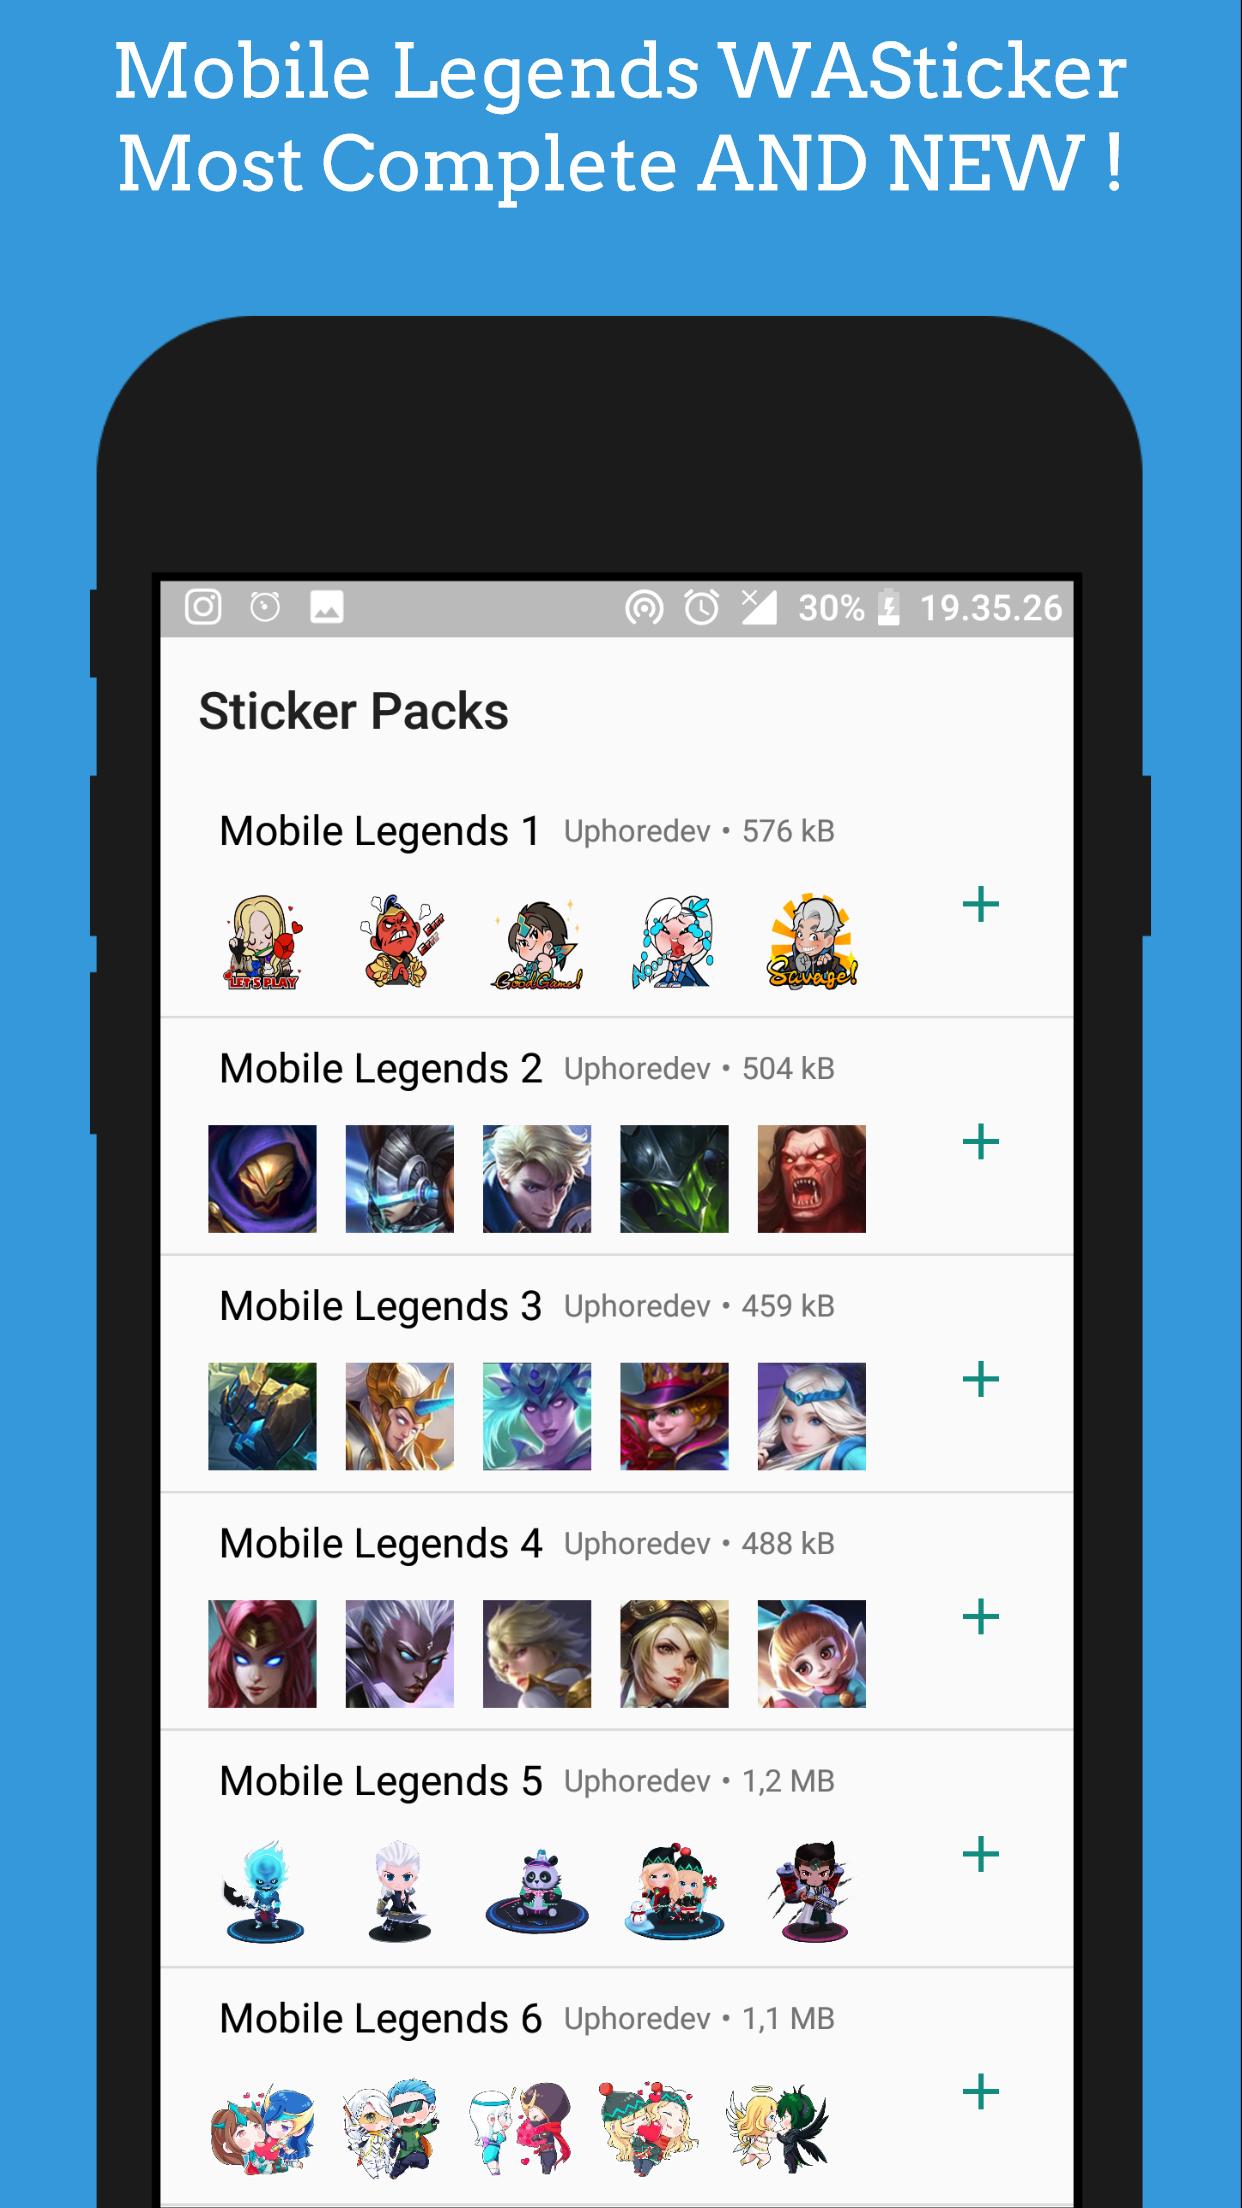 Mobile Legendss Wastickerapps Stiker Whatsapp For Android Apk